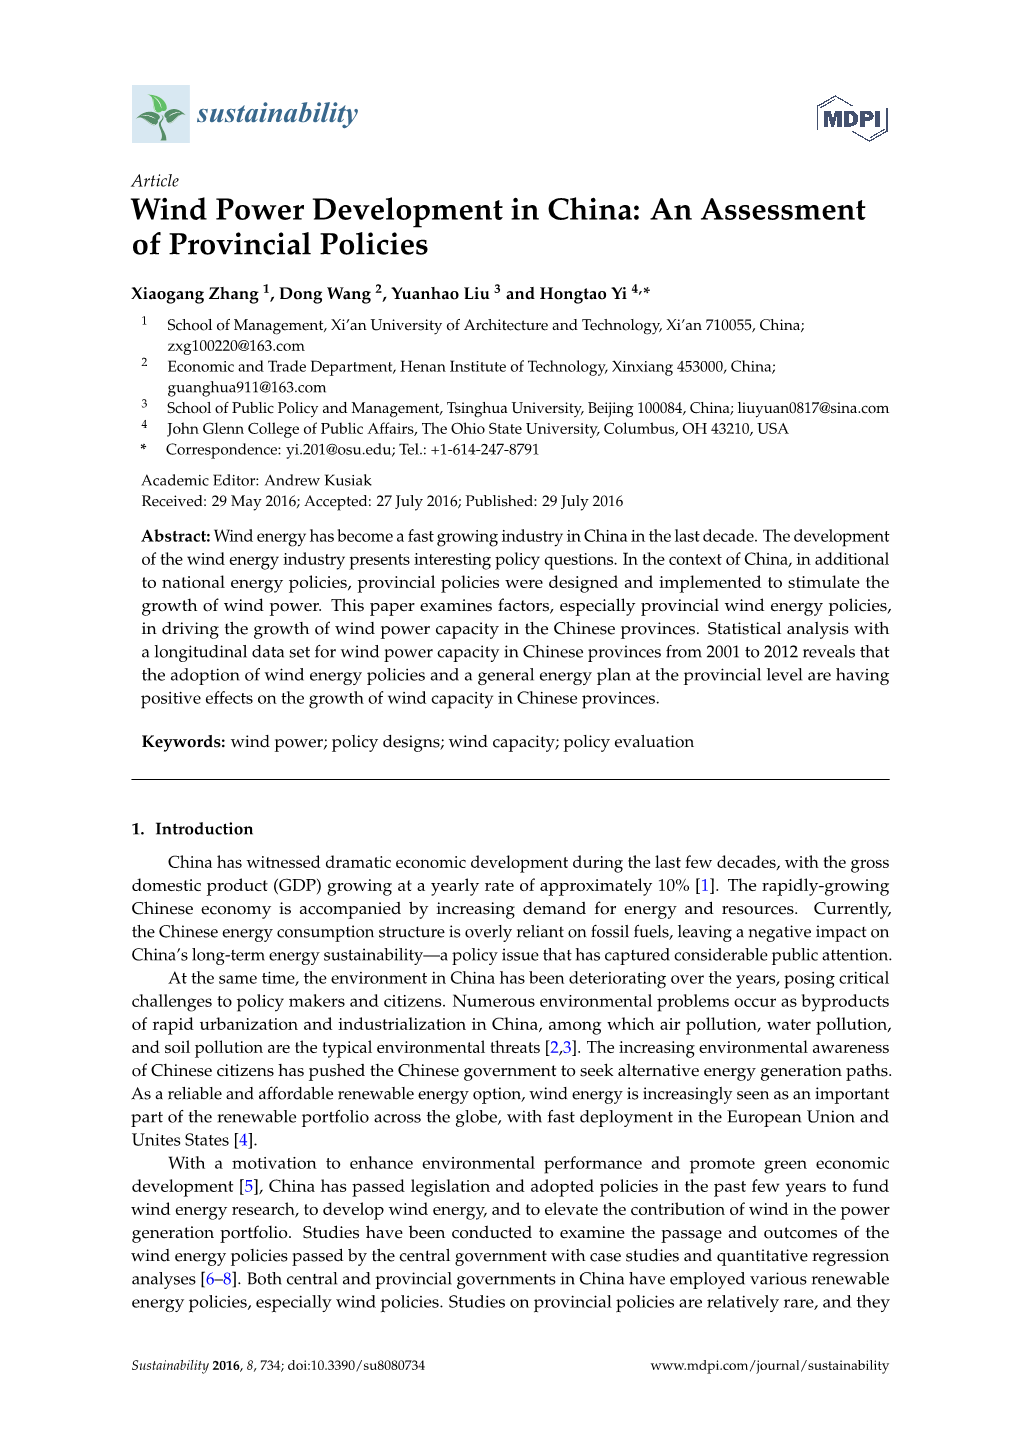 Wind Power Development in China: an Assessment of Provincial Policies